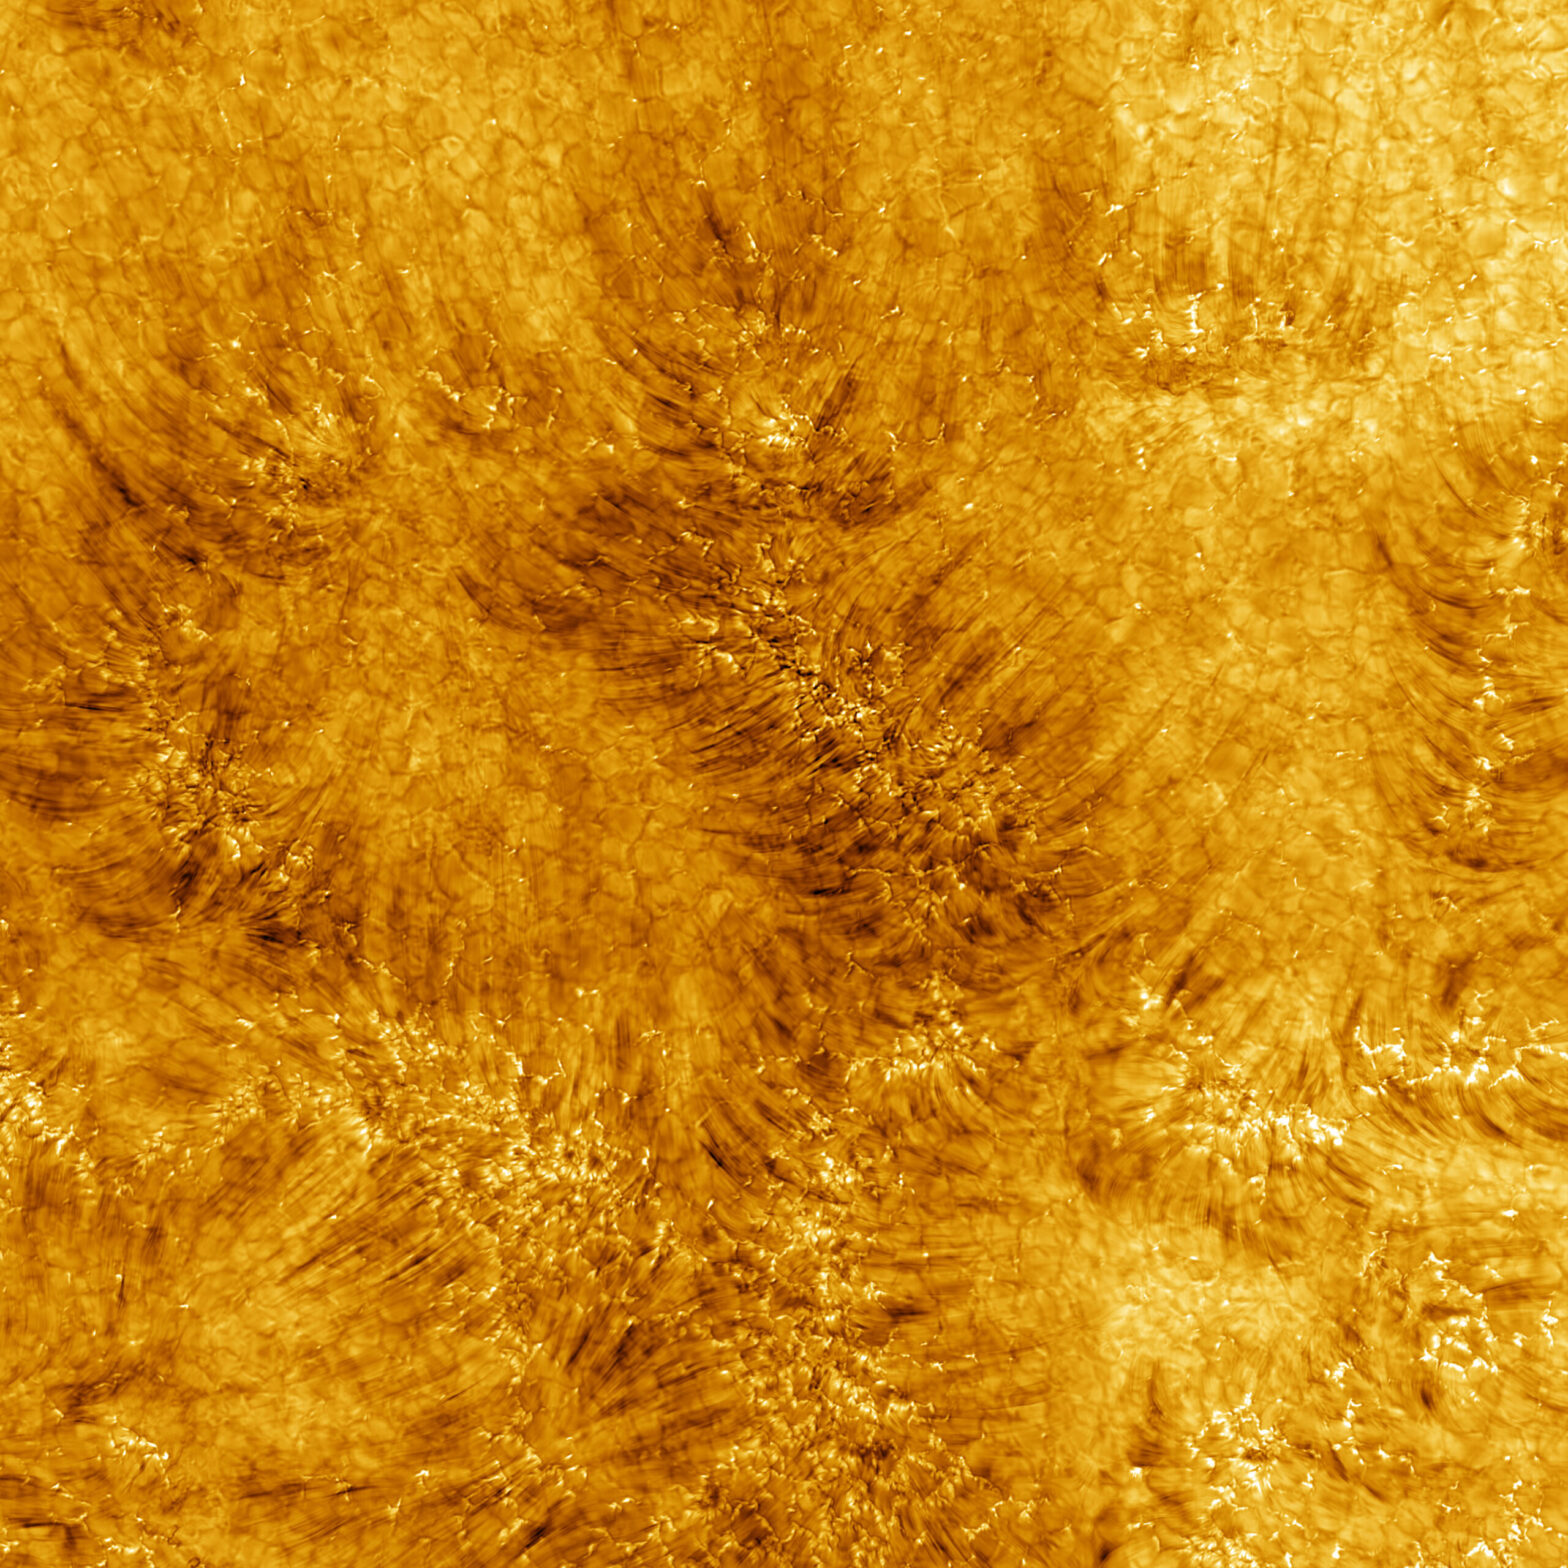 See the Sun's surface like never before in this stunning solar telescope photo